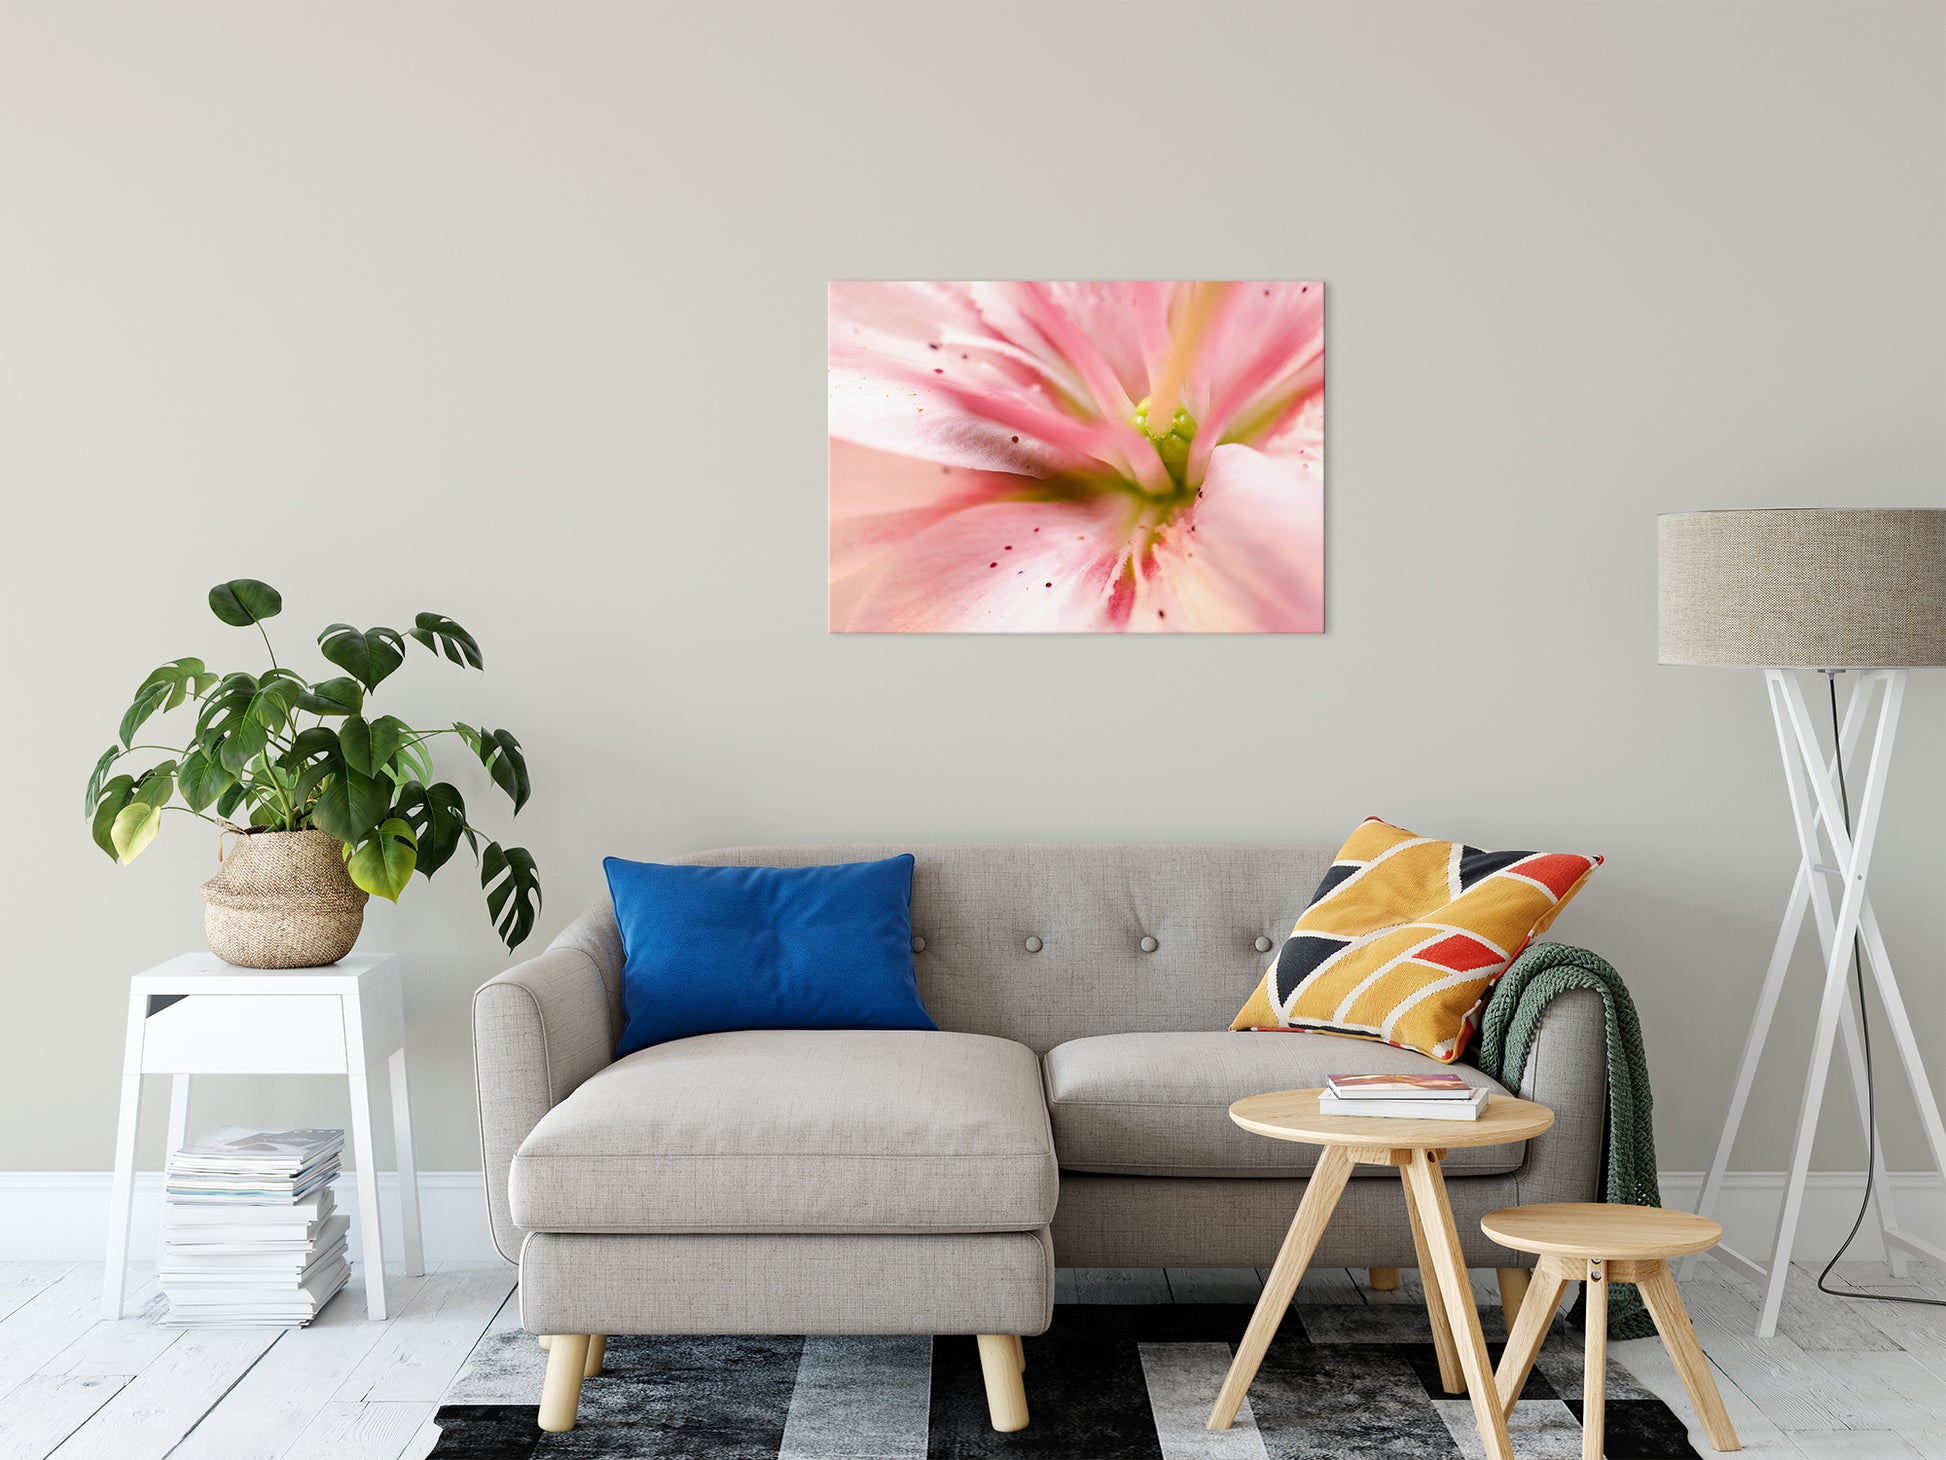 Center of the Stargazer Lily Nature / Floral Photo Fine Art Canvas Wall Art Prints 24" x 36" - PIPAFINEART